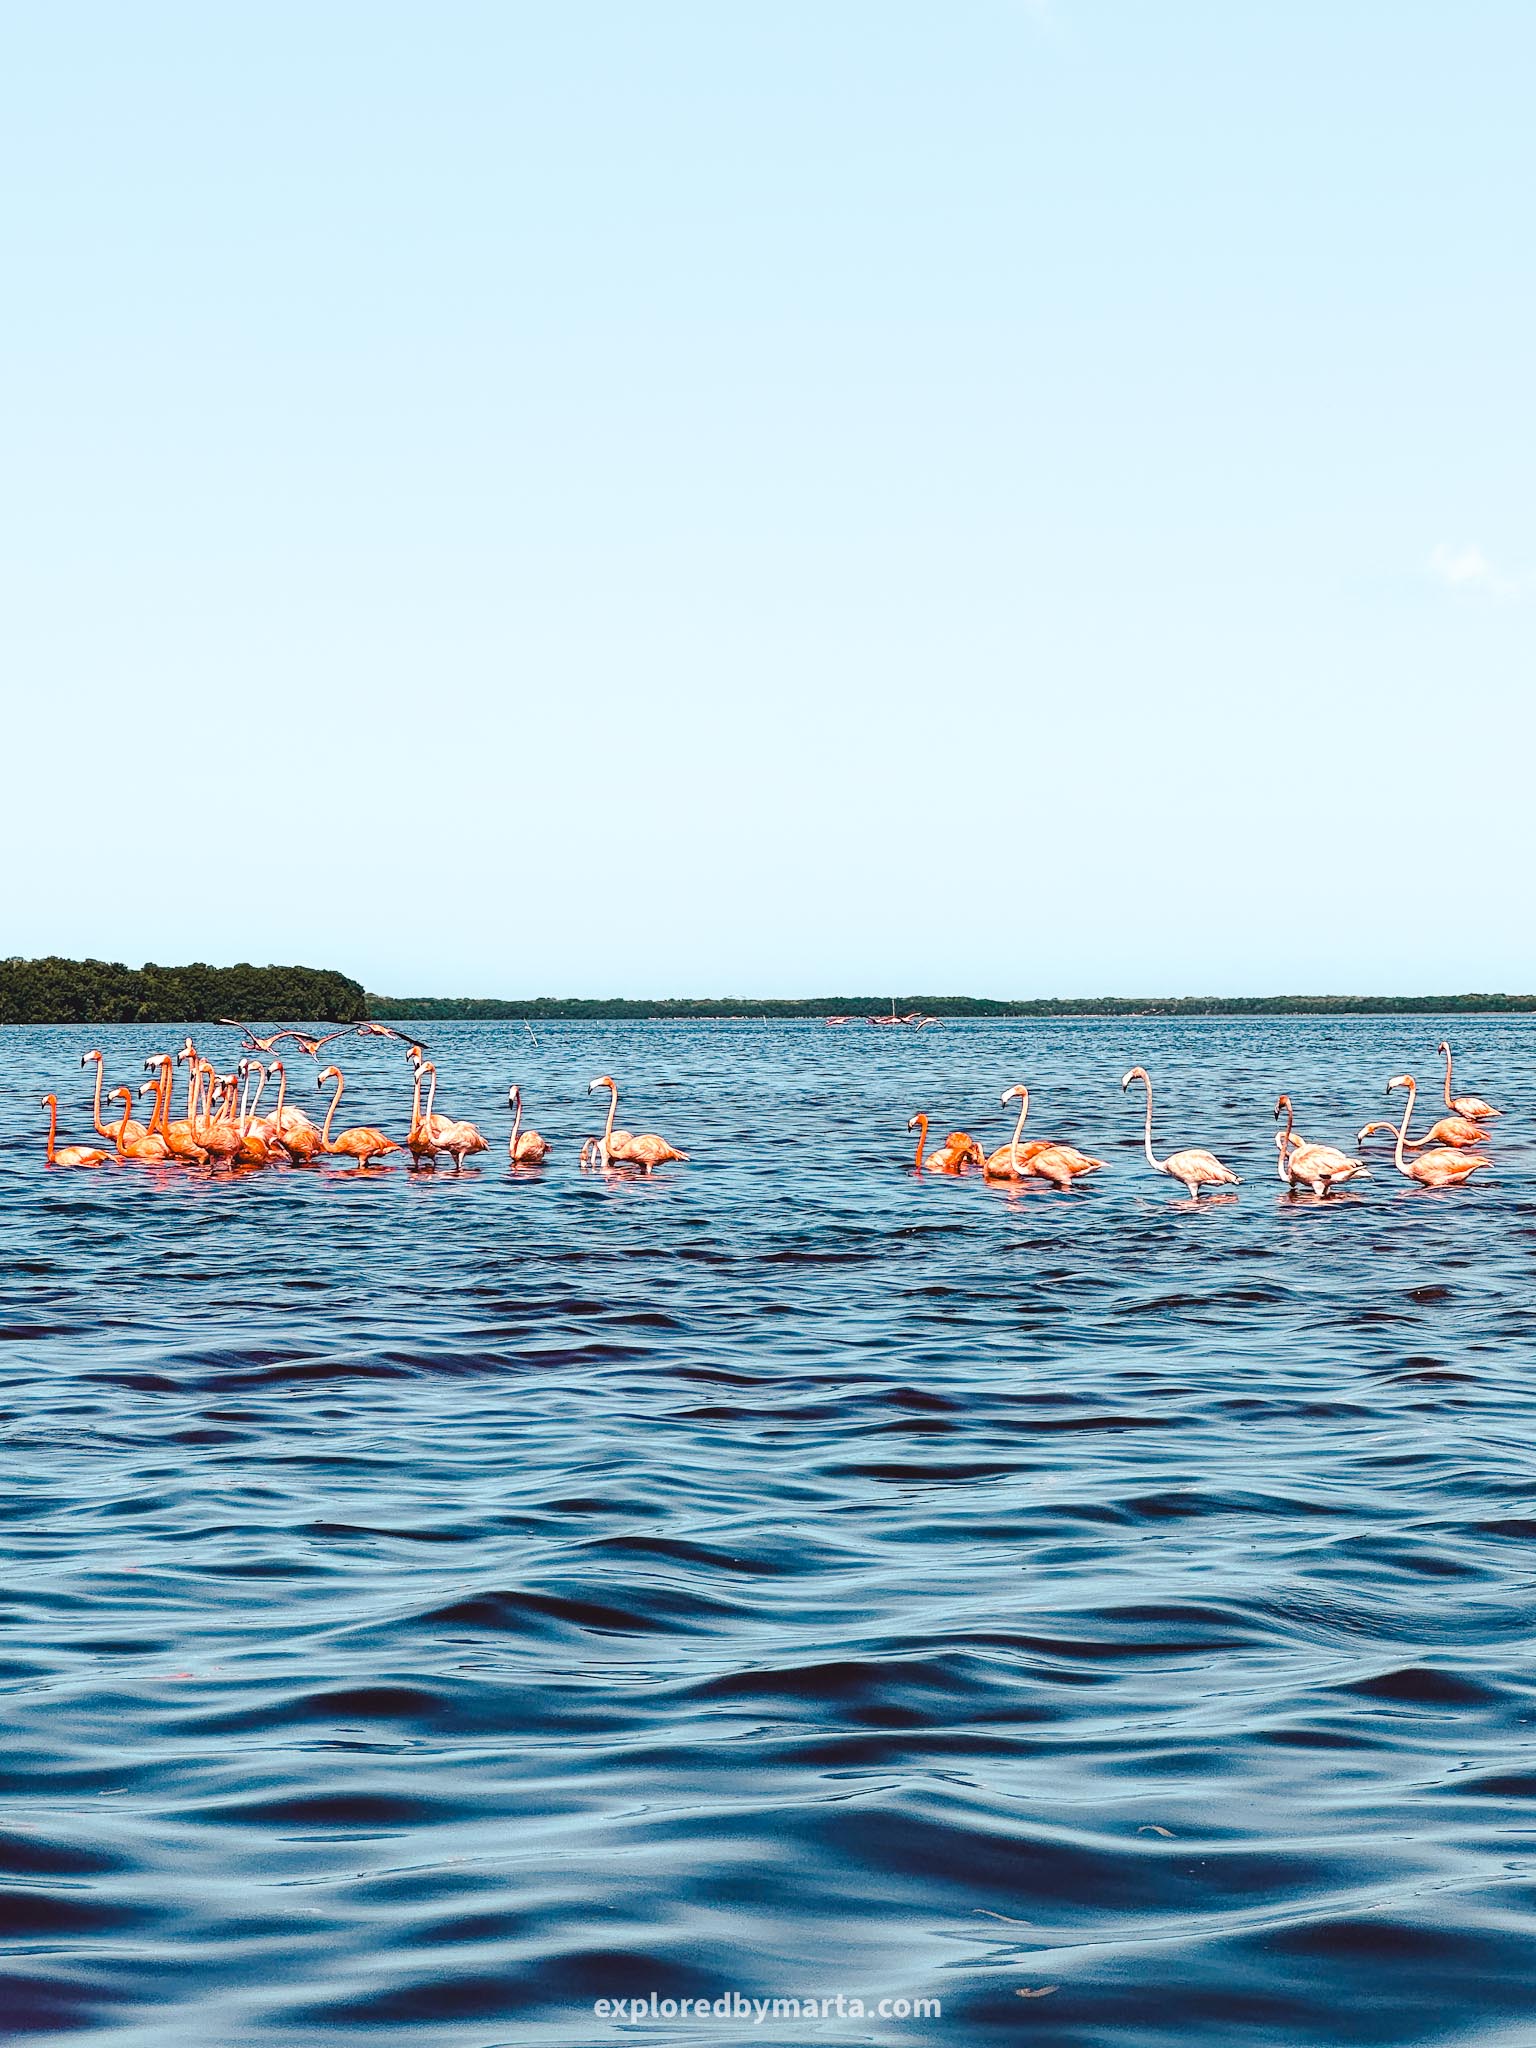 Merida, Mexico-one of the best things to do in Merida is to see pink flamingos in the wild in Celestún